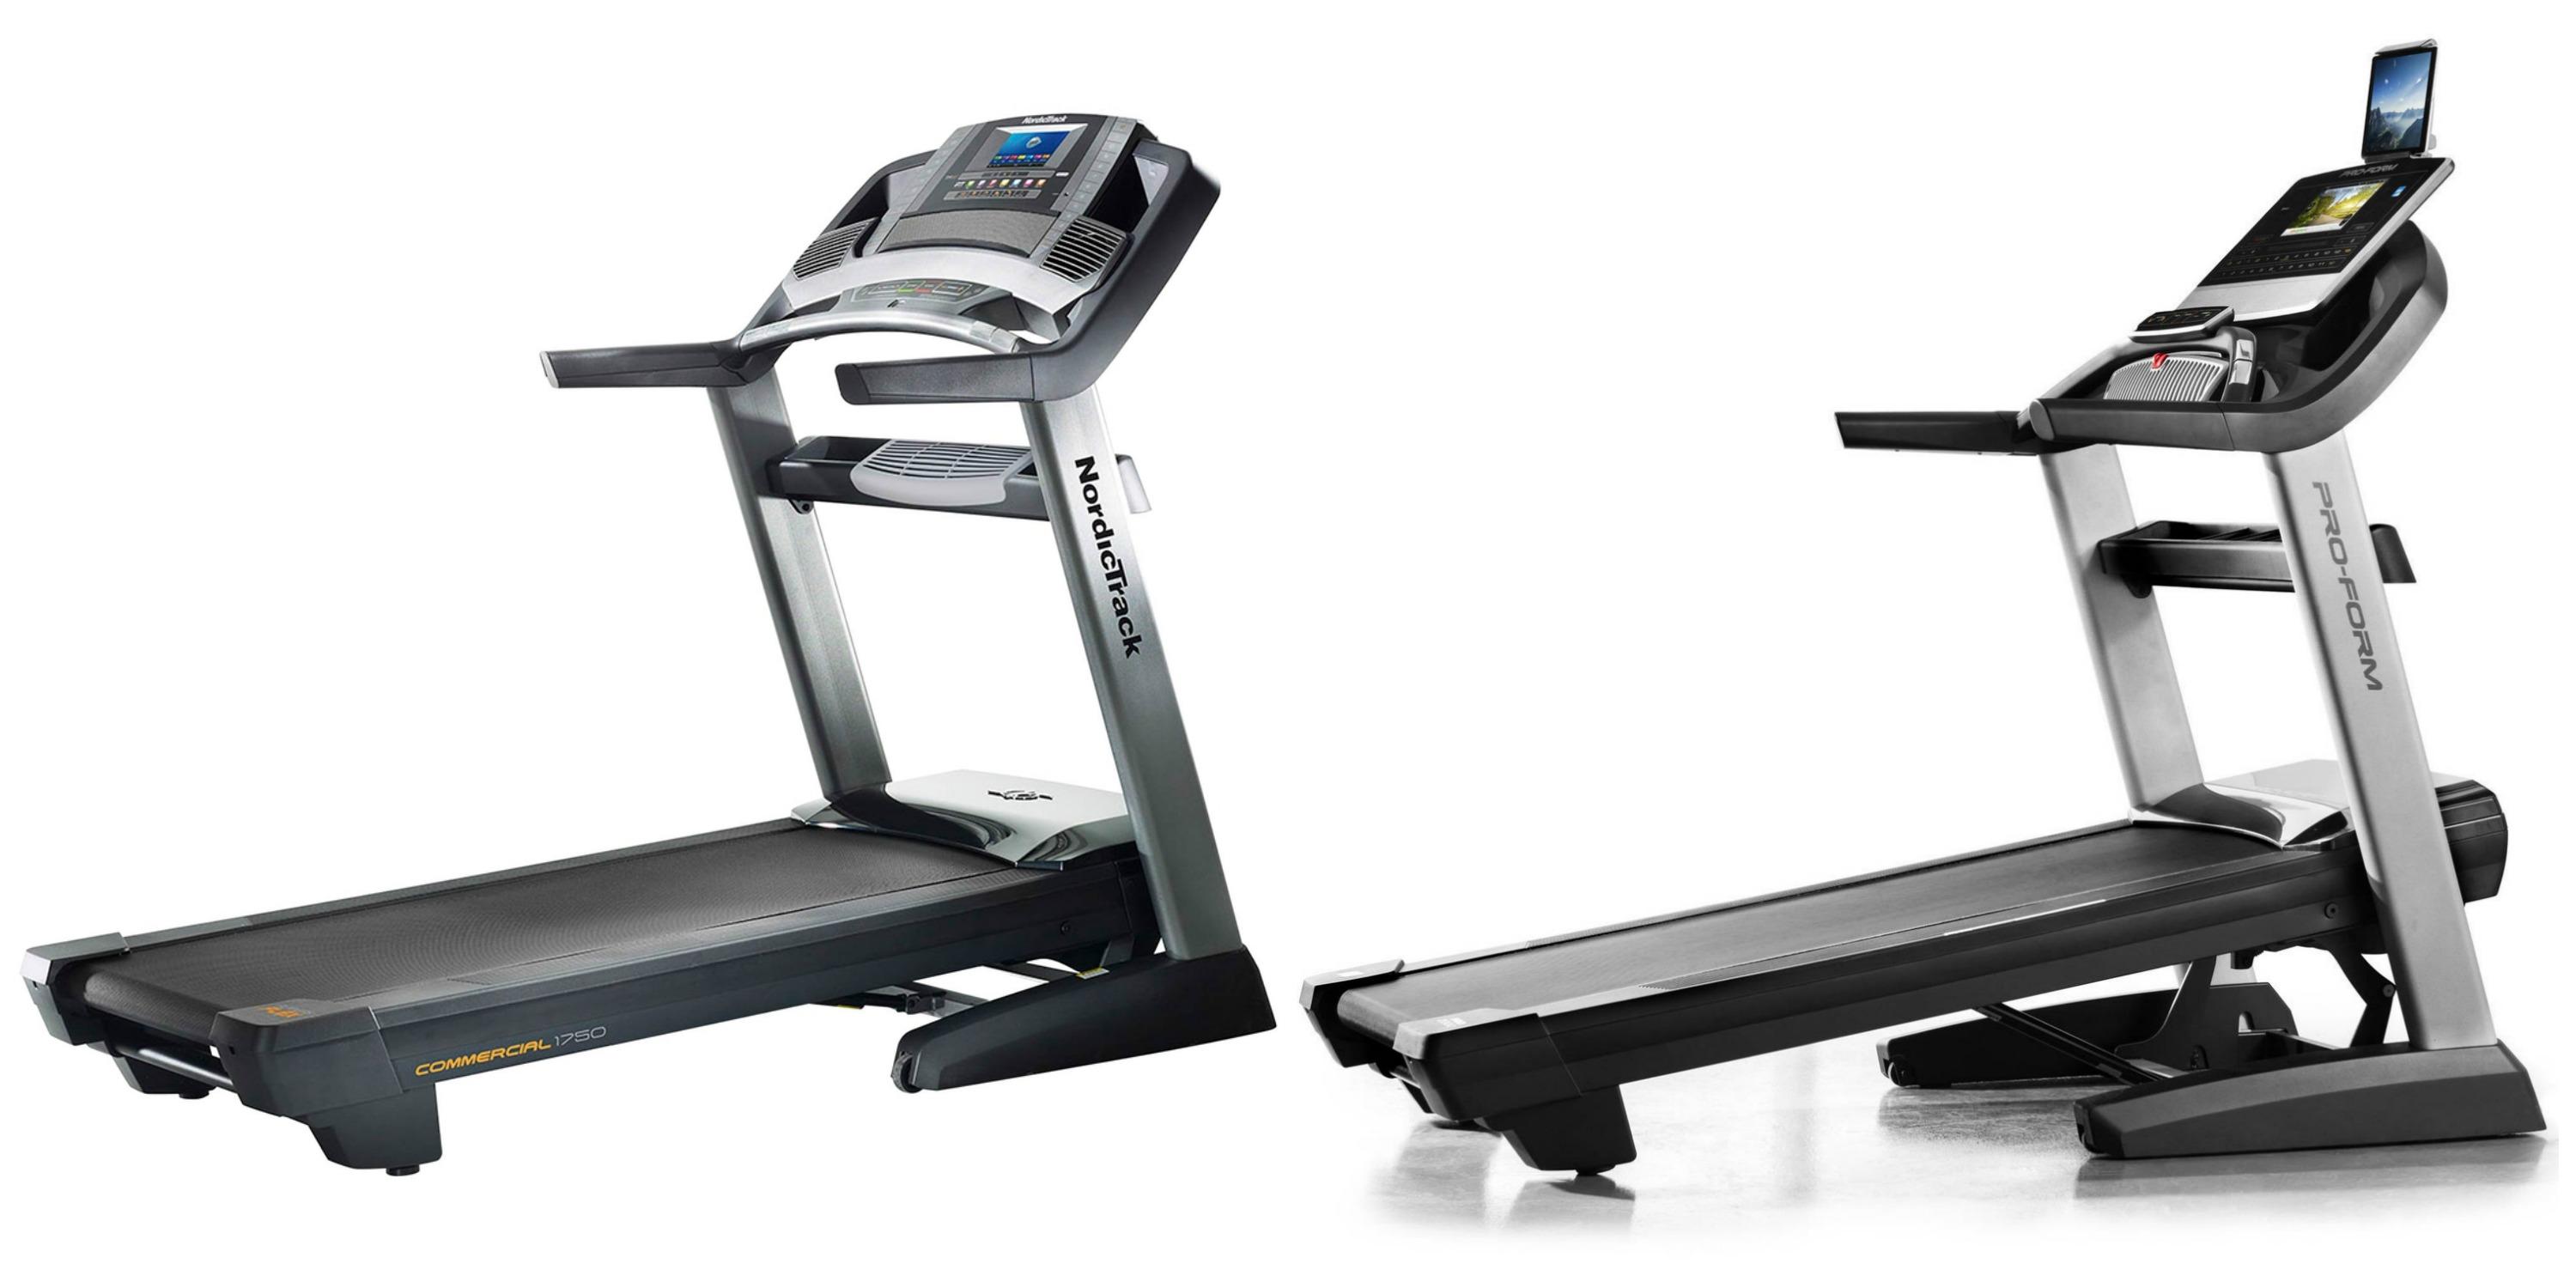 Proform Treadmills Vs Nordictrack Treadmills Stiff Competition For These Sister Brands